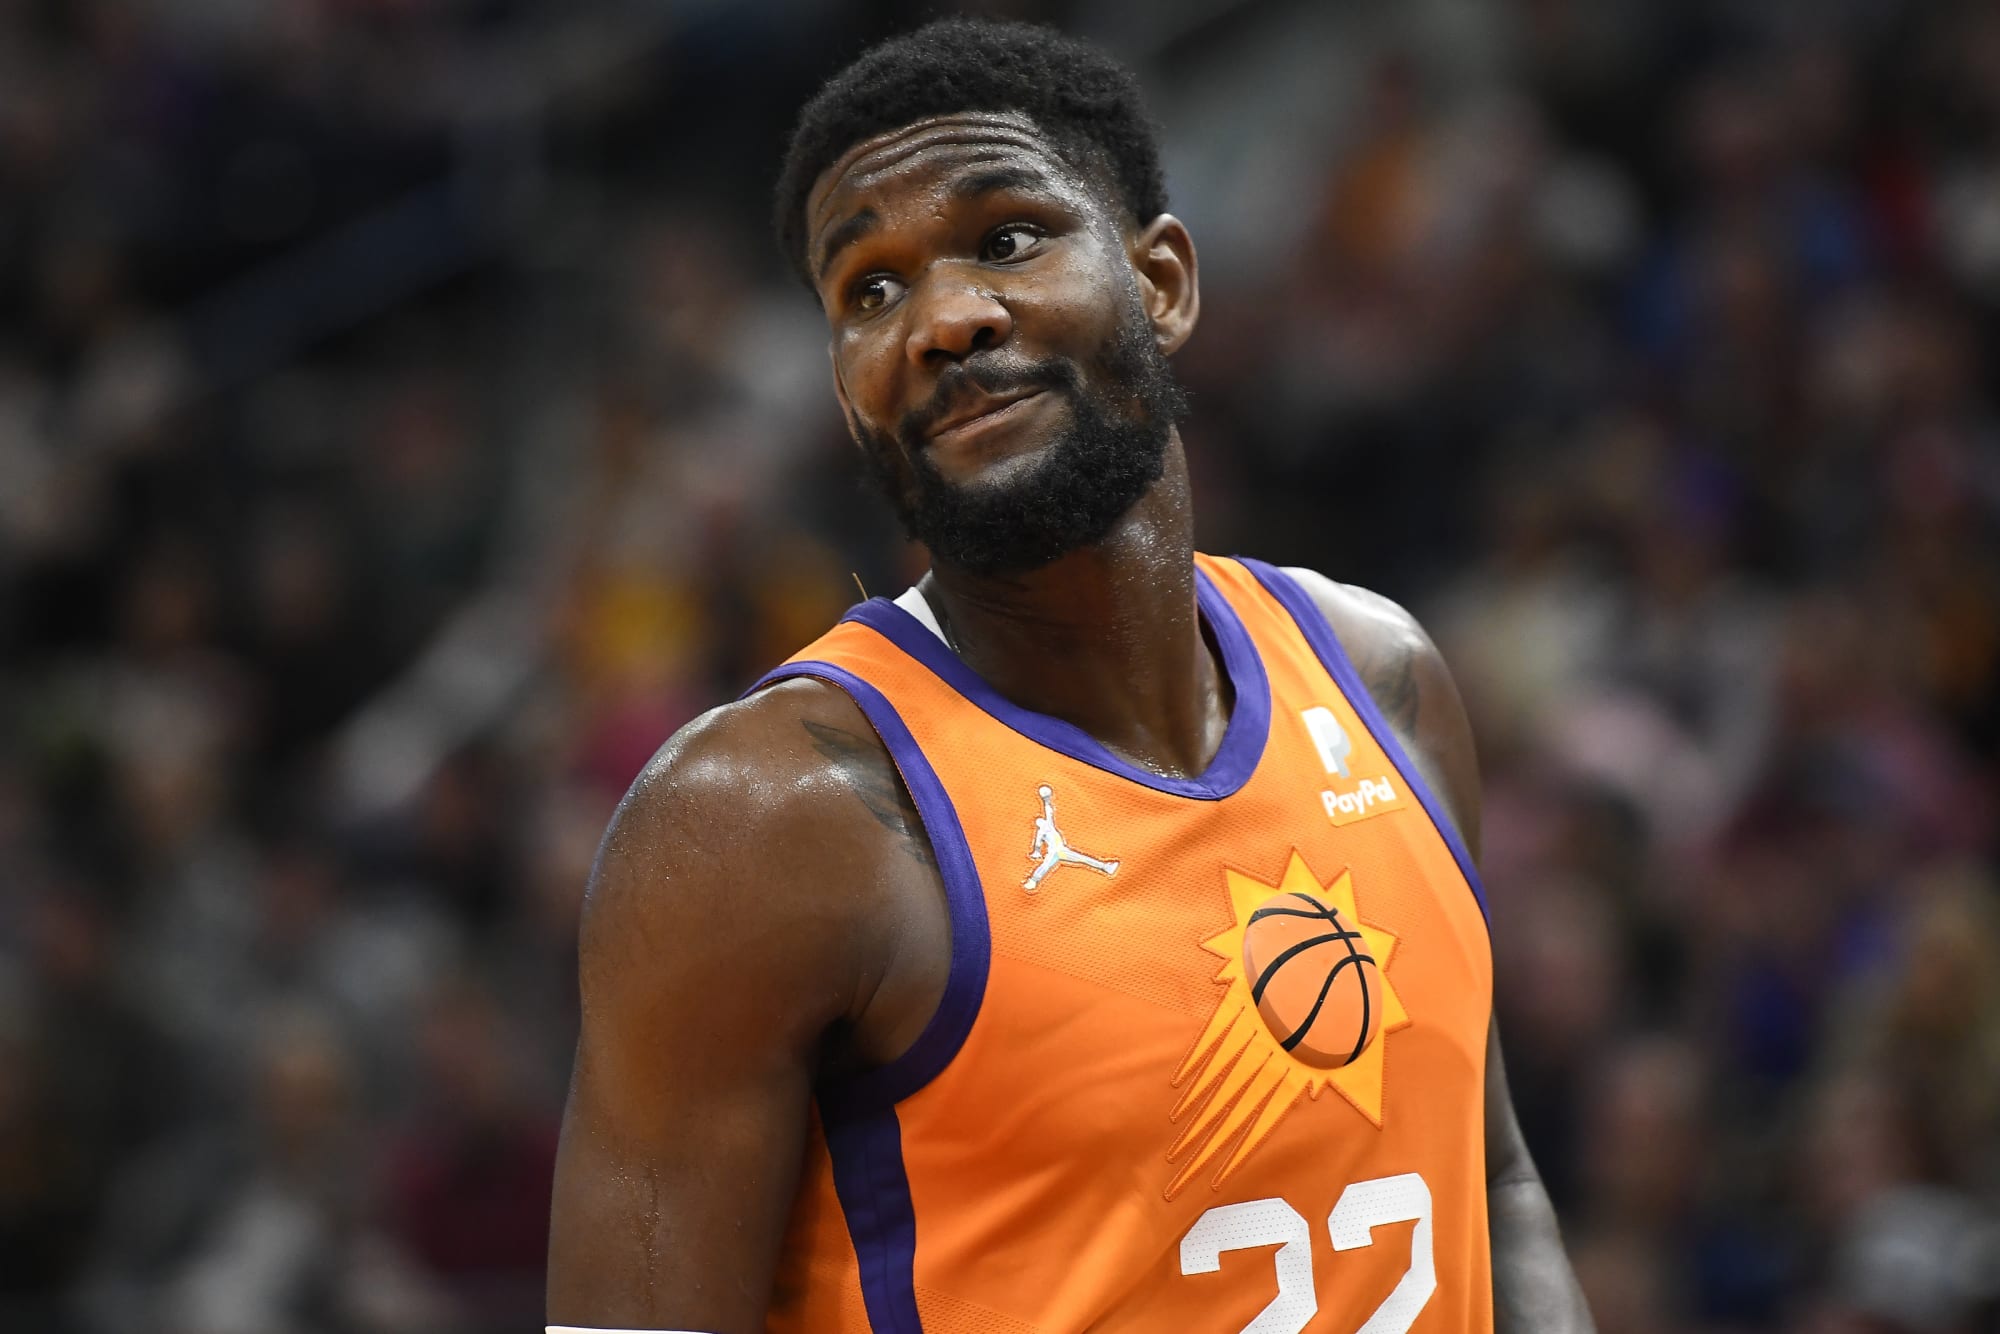 NBA Trades: 3 sign-and-trades for Deandre Ayton and the Phoenix Suns